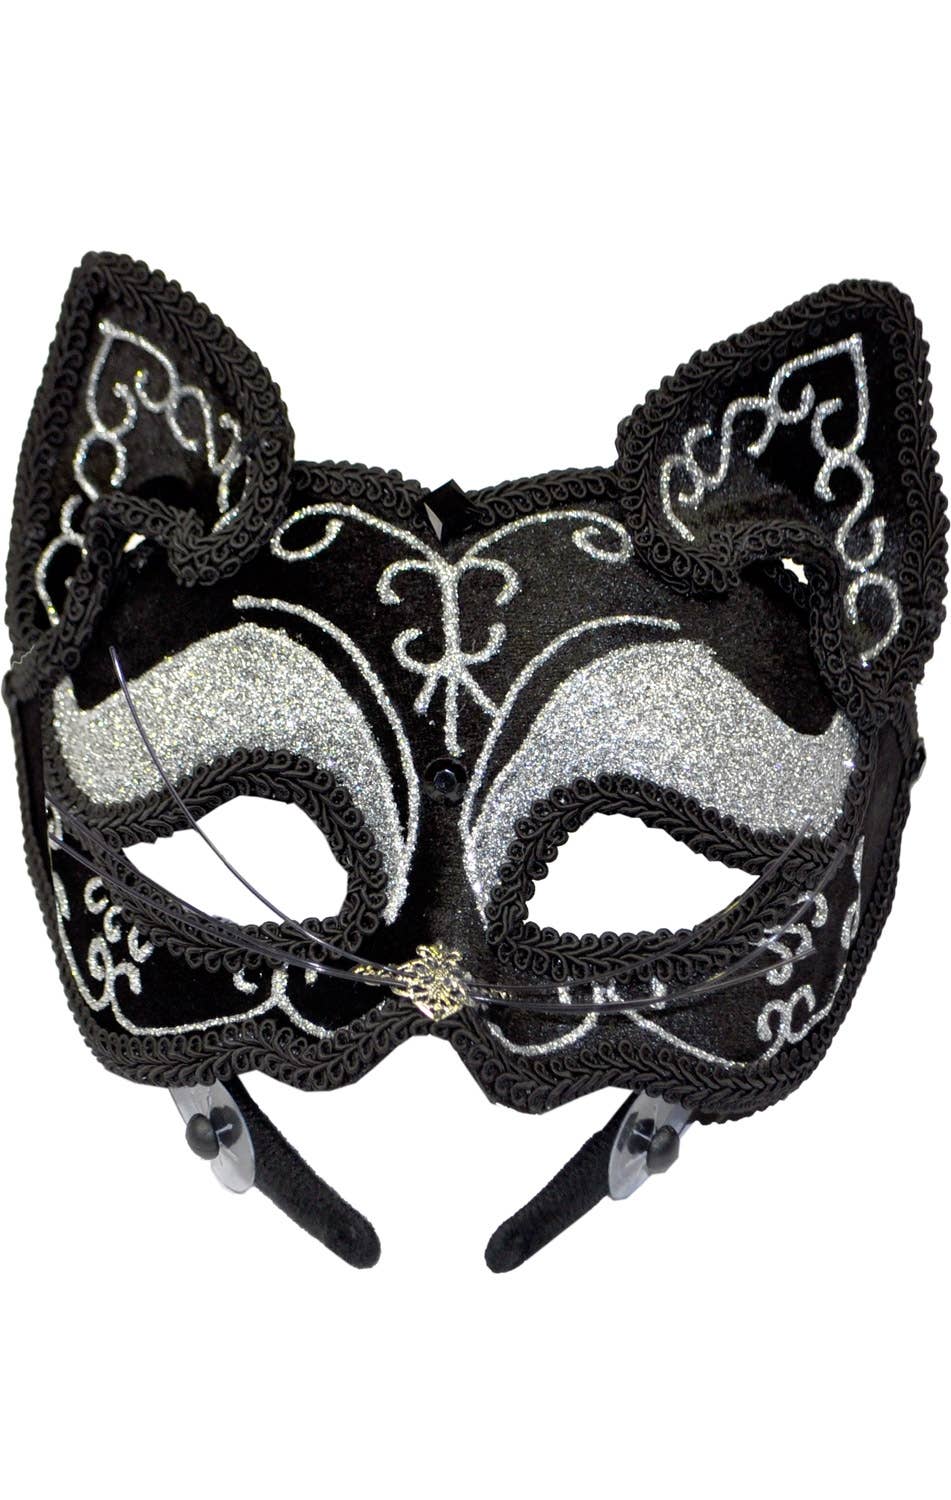 Silver And Black Cat Face Women's Masquerade Mask on Headband